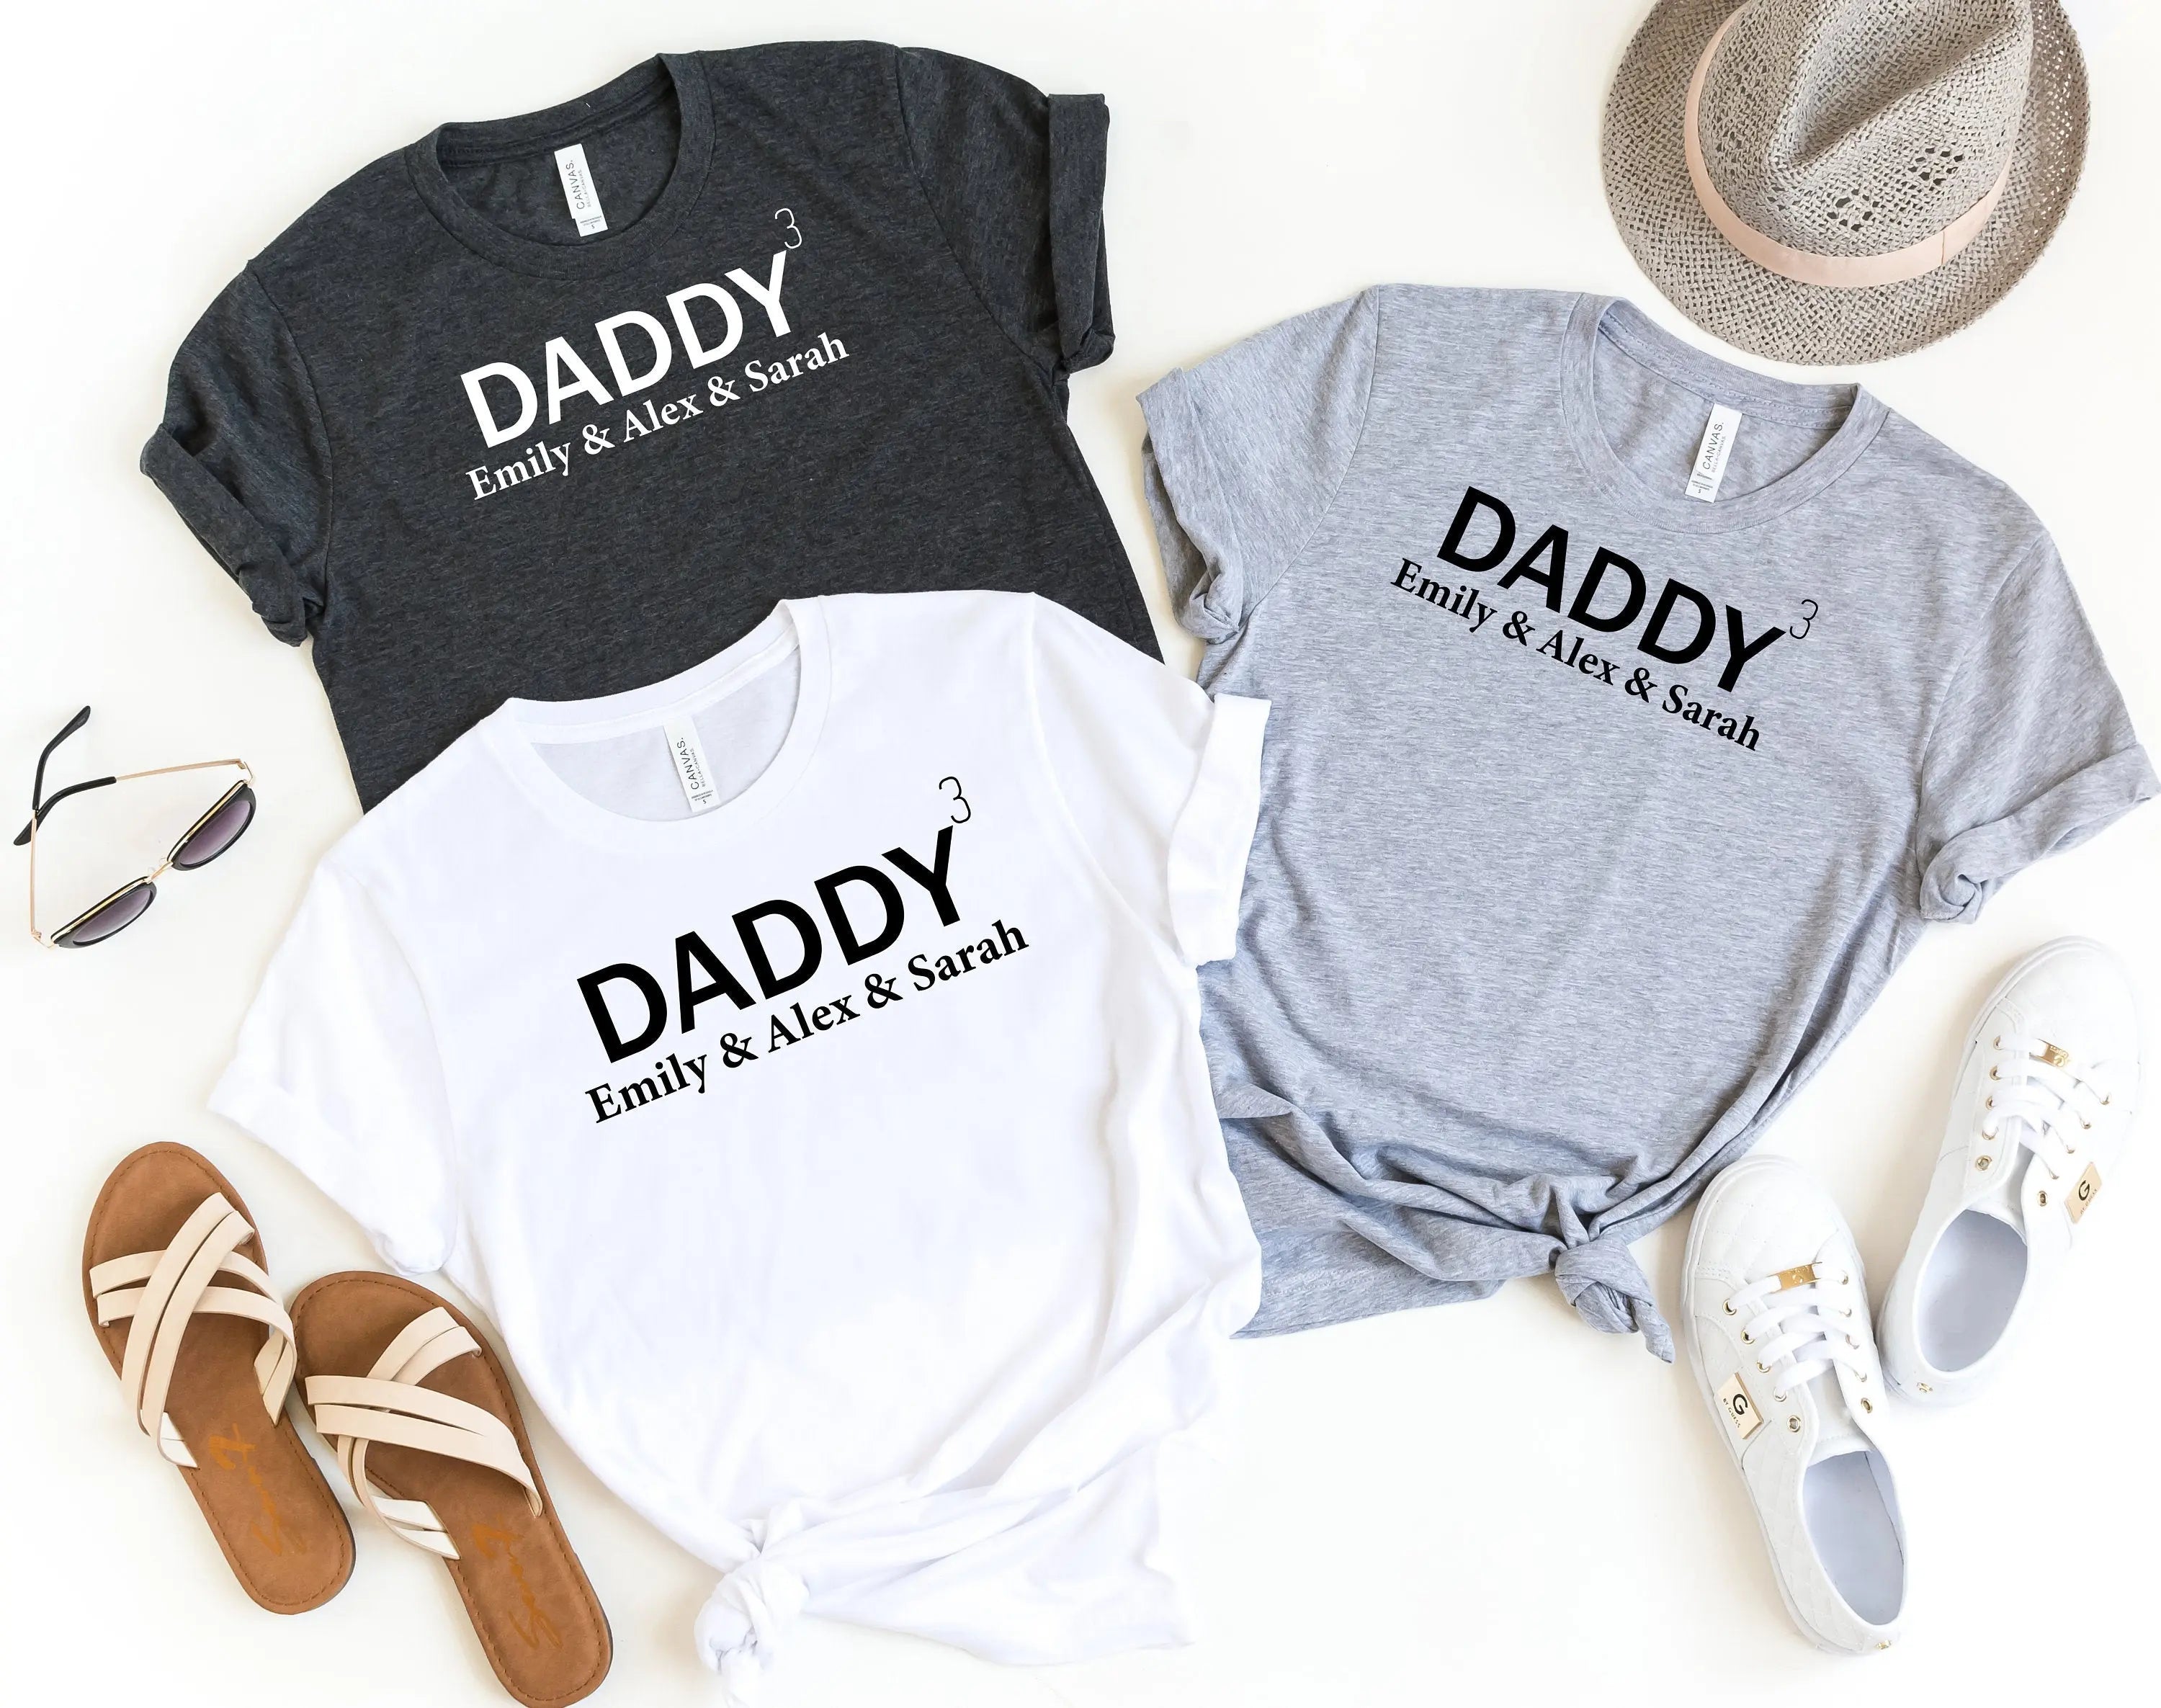 Father's day - Personalized Dad Shirt With Kids Name Shirt ,Funny Custom  T-Shirt Father's Day Gift Idea Funny Dad Shirt Gift For Dad 29636